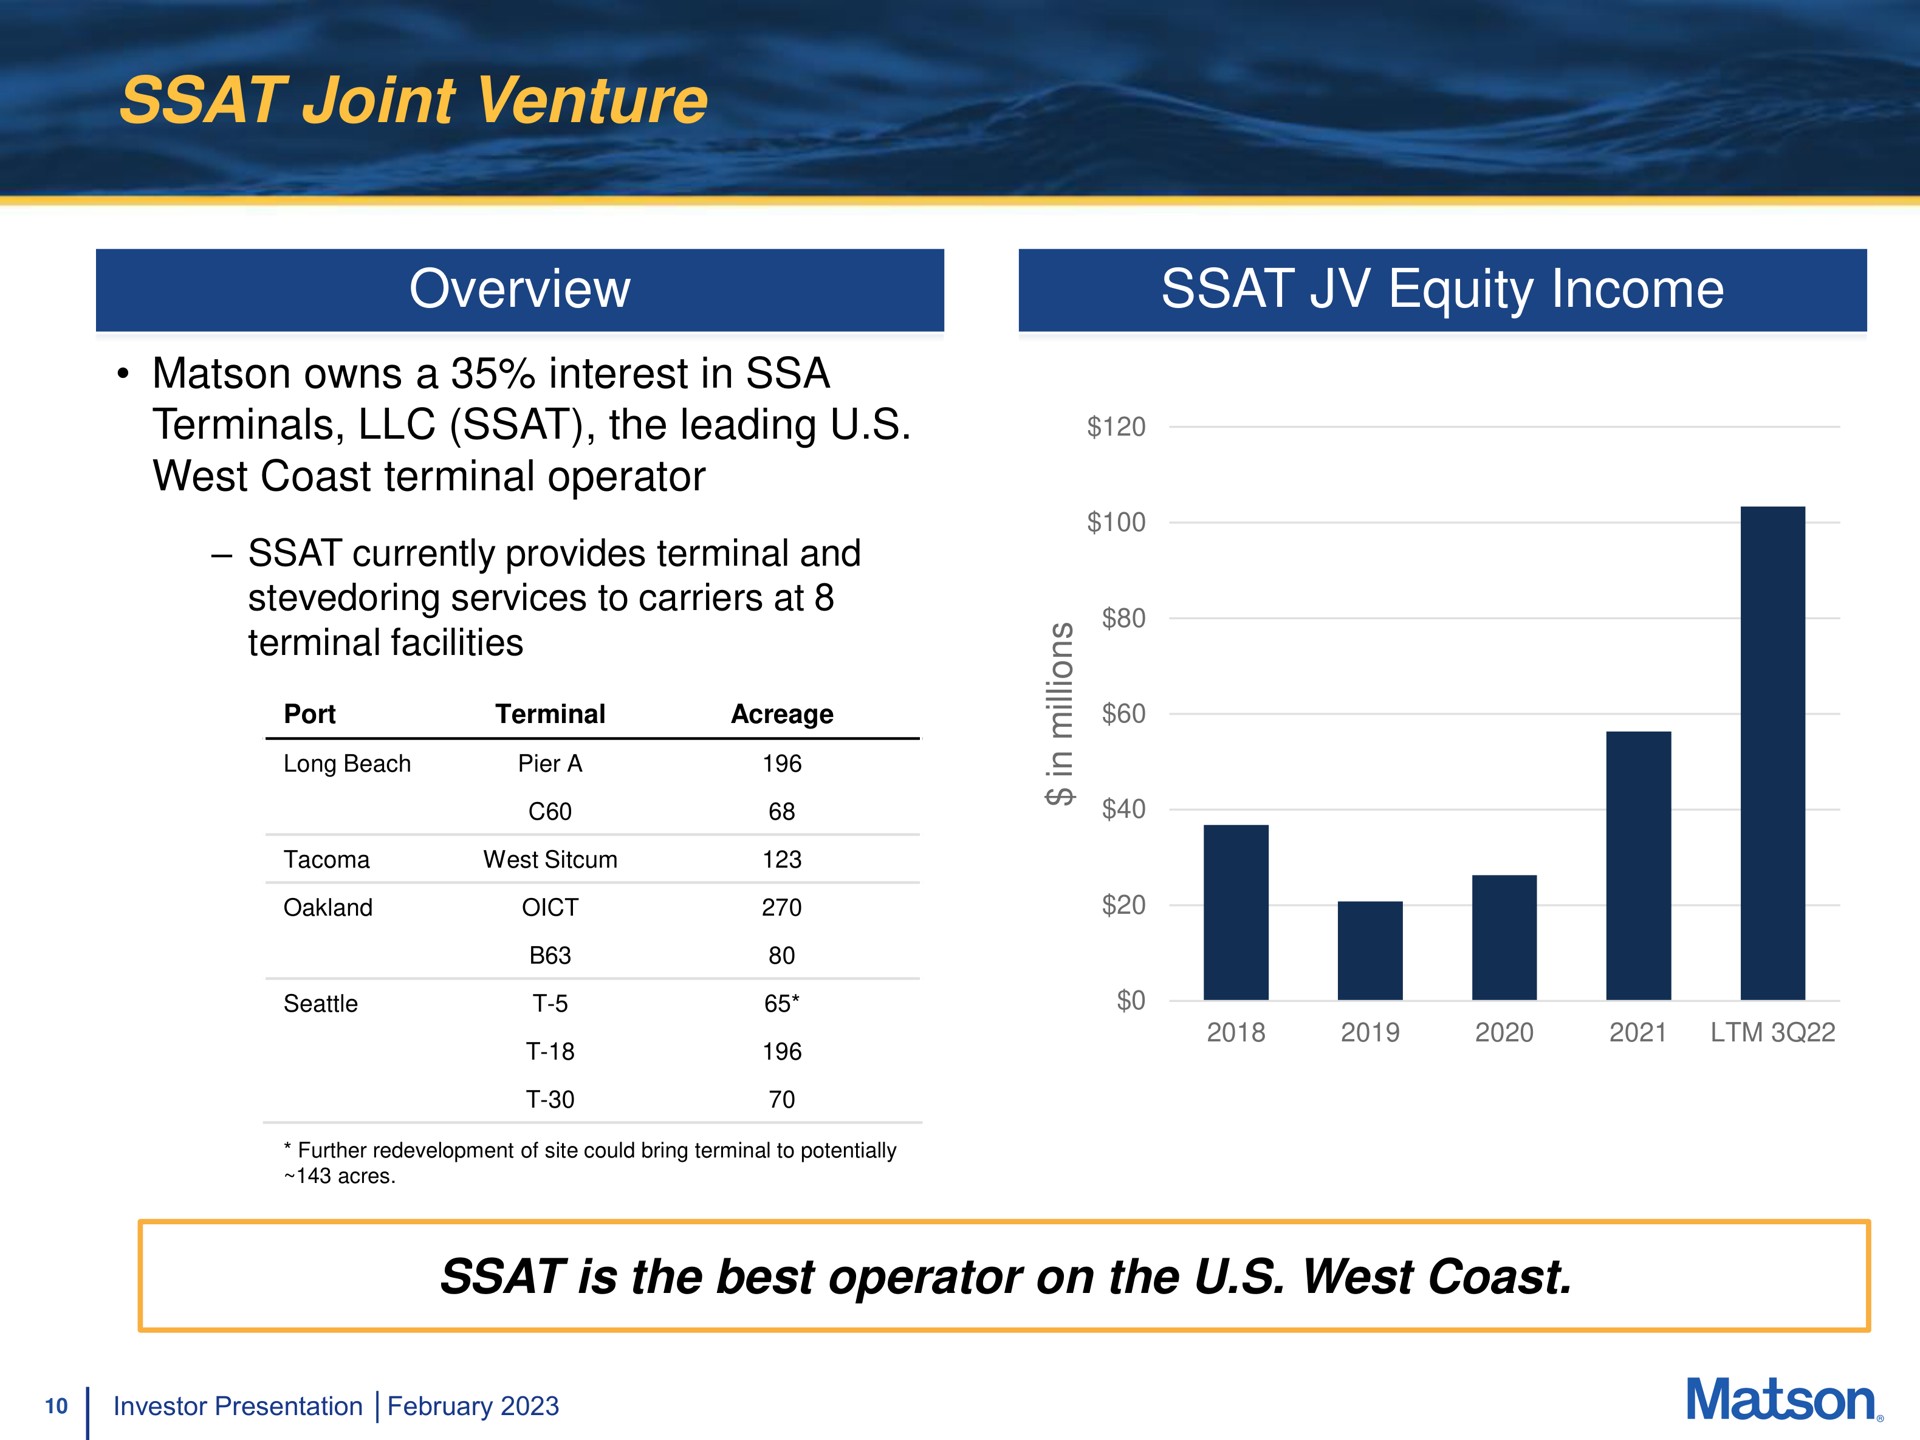 joint venture overview equity income owns a interest in terminals the leading west coast terminal operator is the best operator on the west coast | Matson